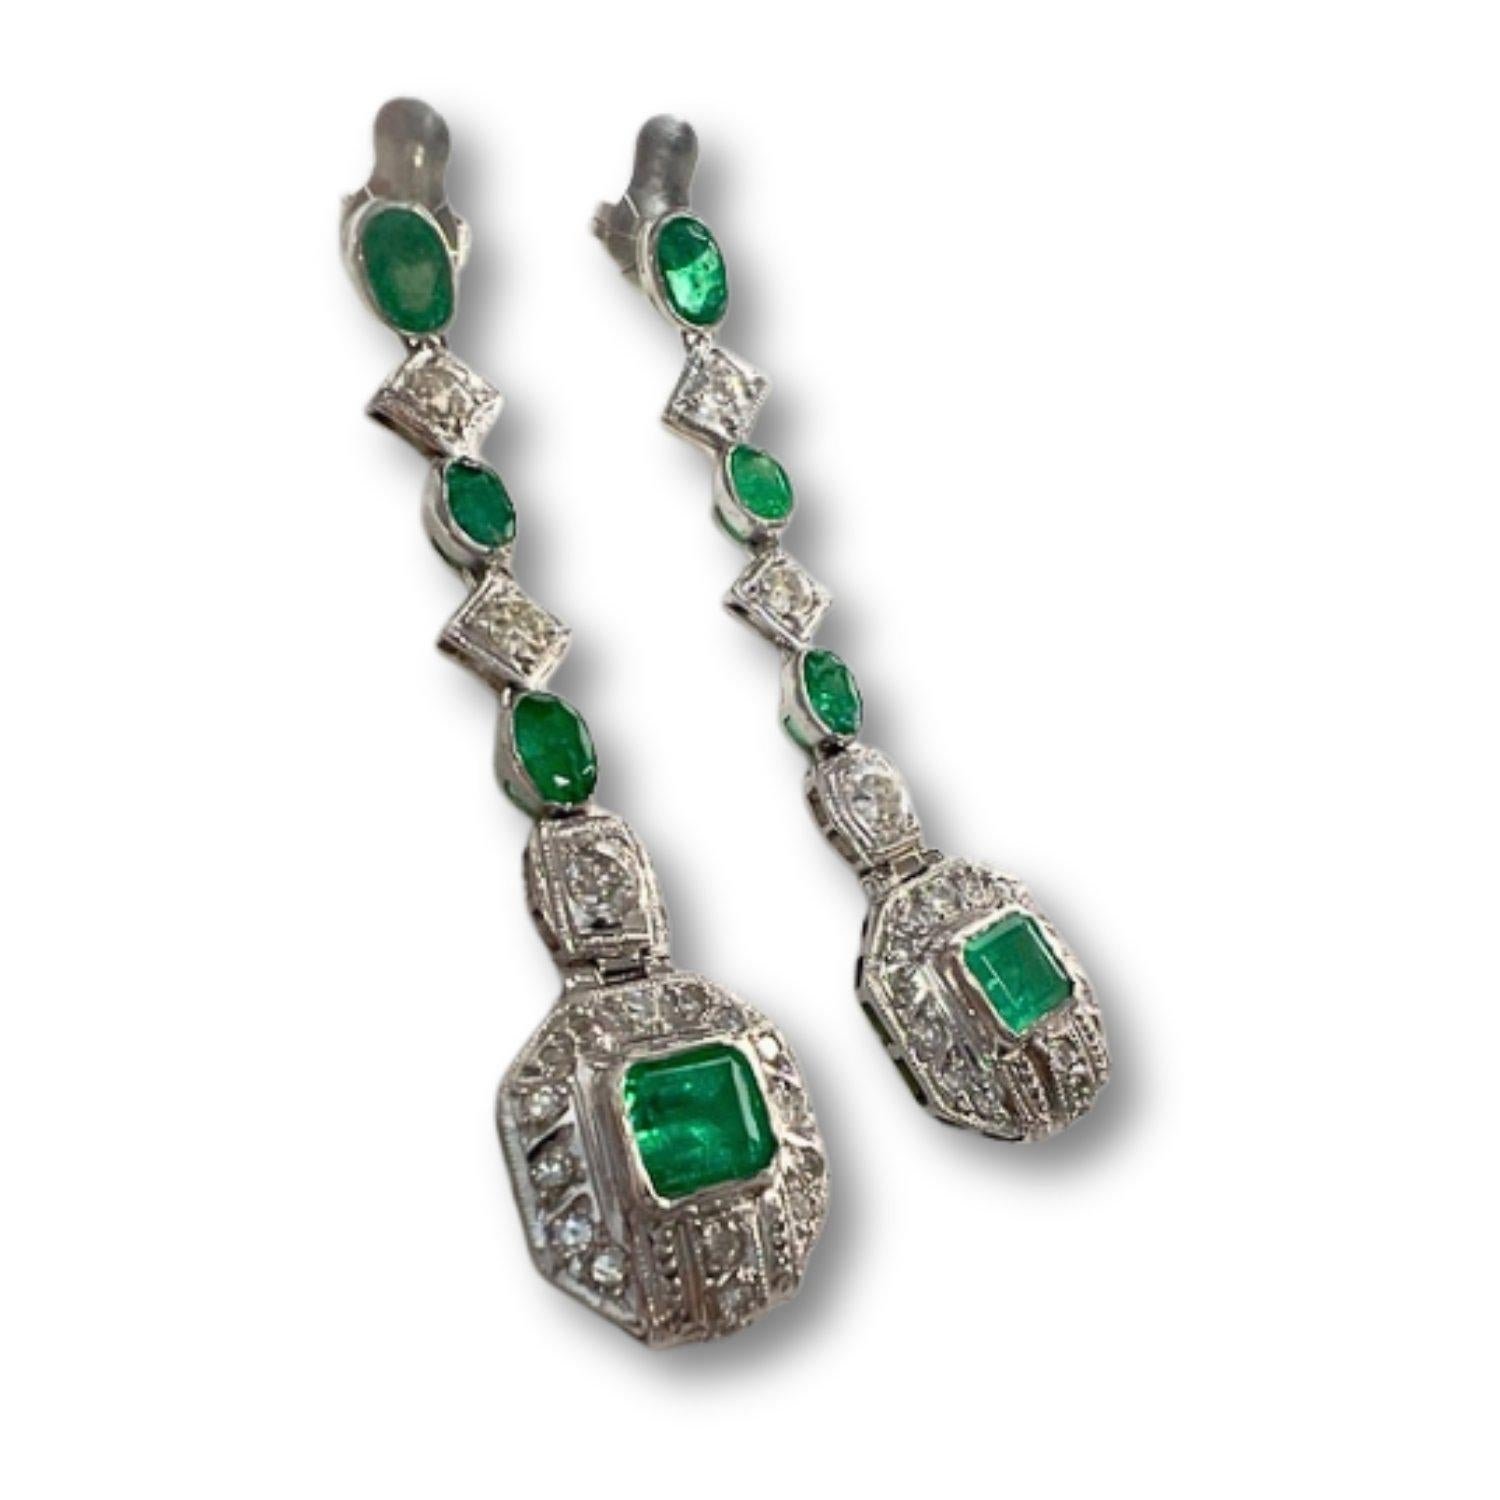 Discover timeless elegance with these Art Deco style earrings crafted in 750 karat platinum, adorned with diamonds and emeralds. Weighing 14.60 grams, these earrings boast a length of 6.5 cm, making them a striking statement piece for any